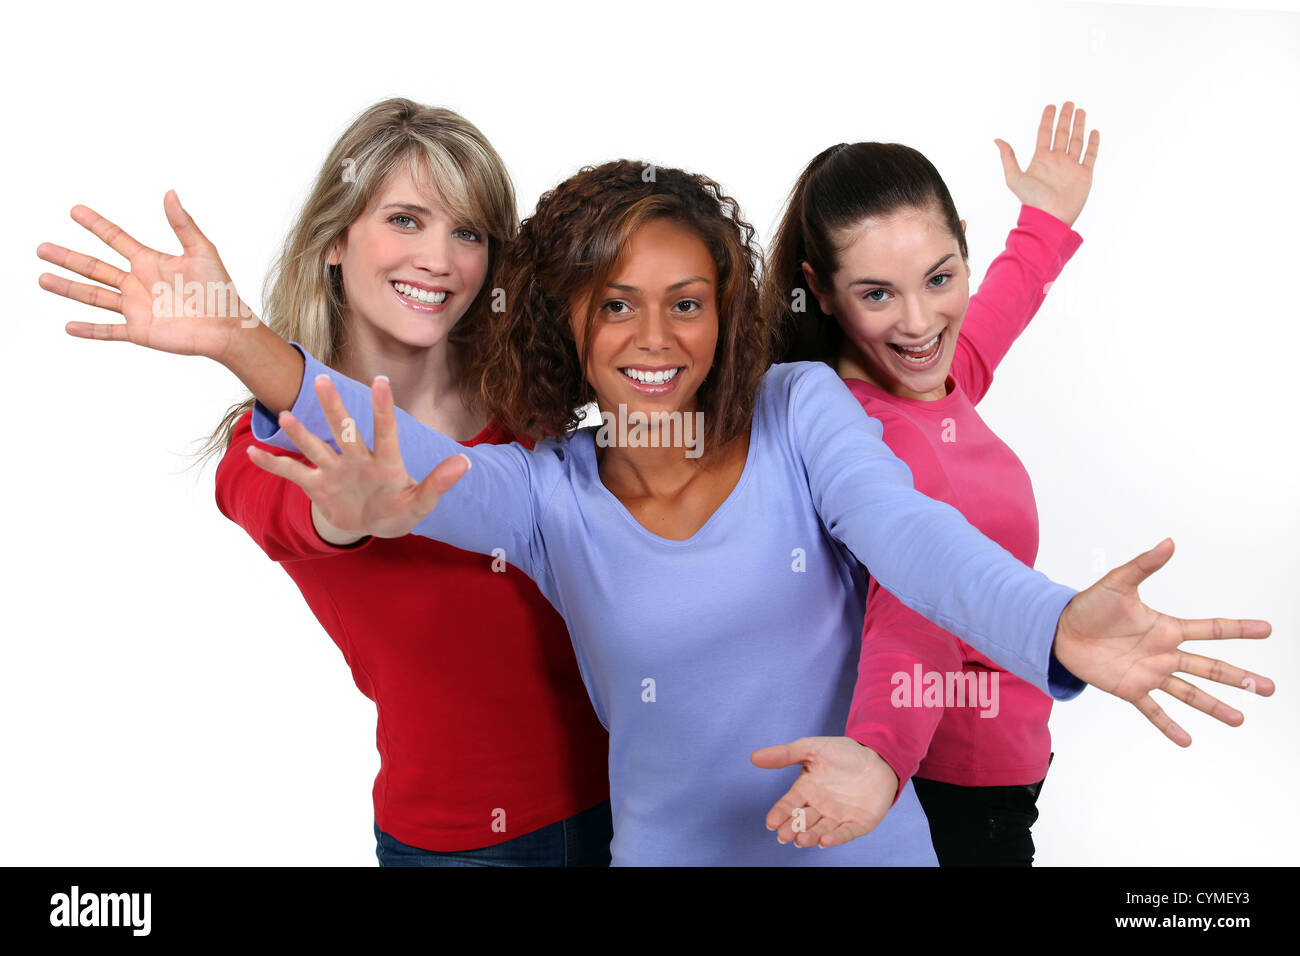 Three happy young woman Stock Photo